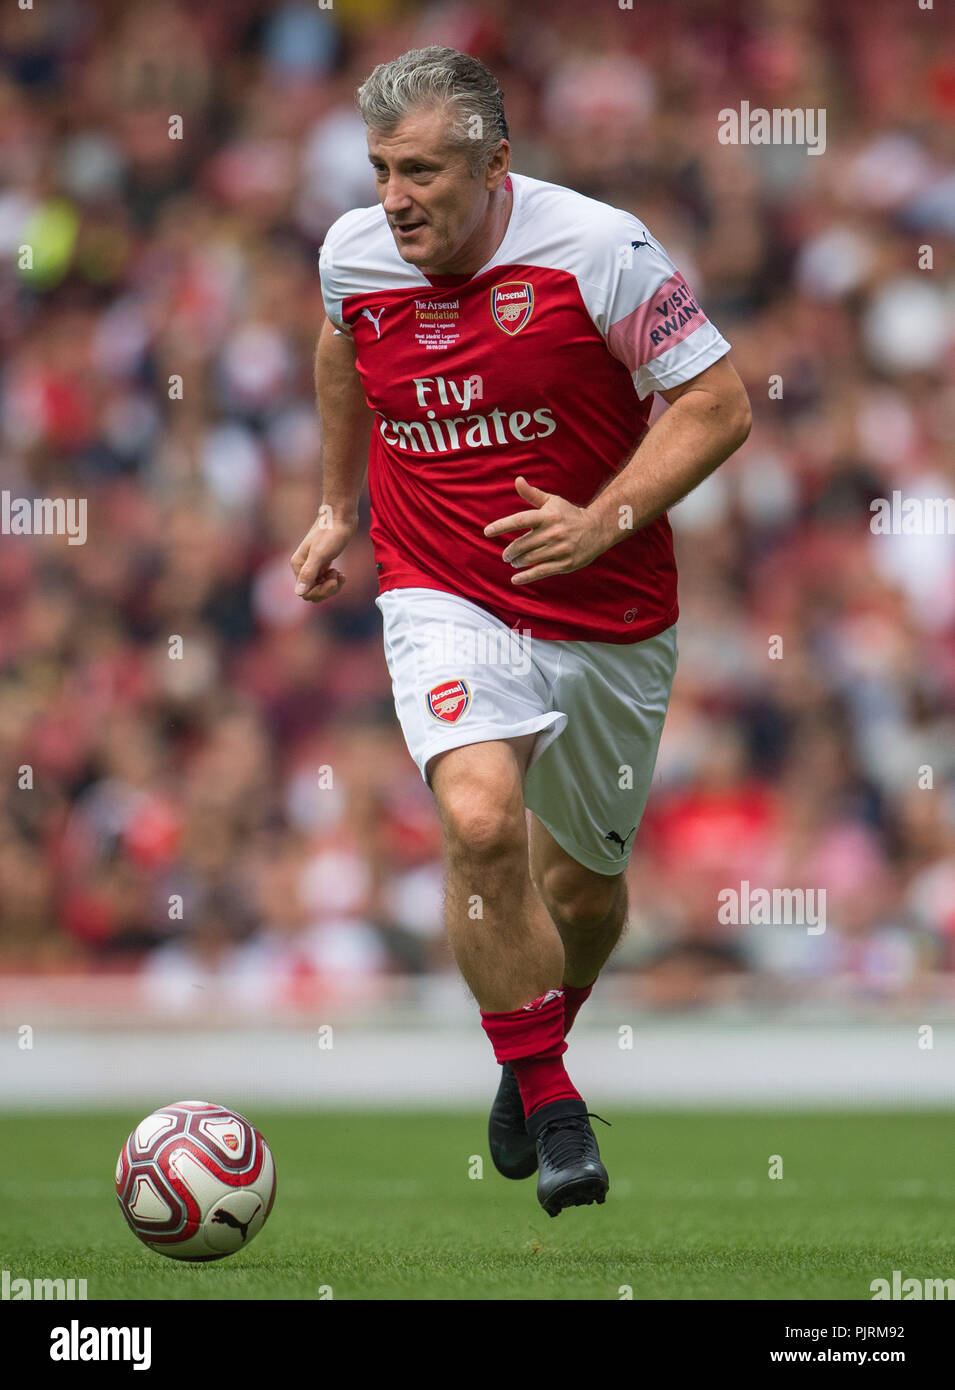 Arsenal Legends' Davor Suker during the Legends match at the Emirates Stadium, London. PRESS ASSOCIATION Photo. Picture date: Saturday September 8, 2018. See PA story SOCCER Arsenal Legends. Photo credit should read: Dominic Lipinski/PA Wire. Stock Photo